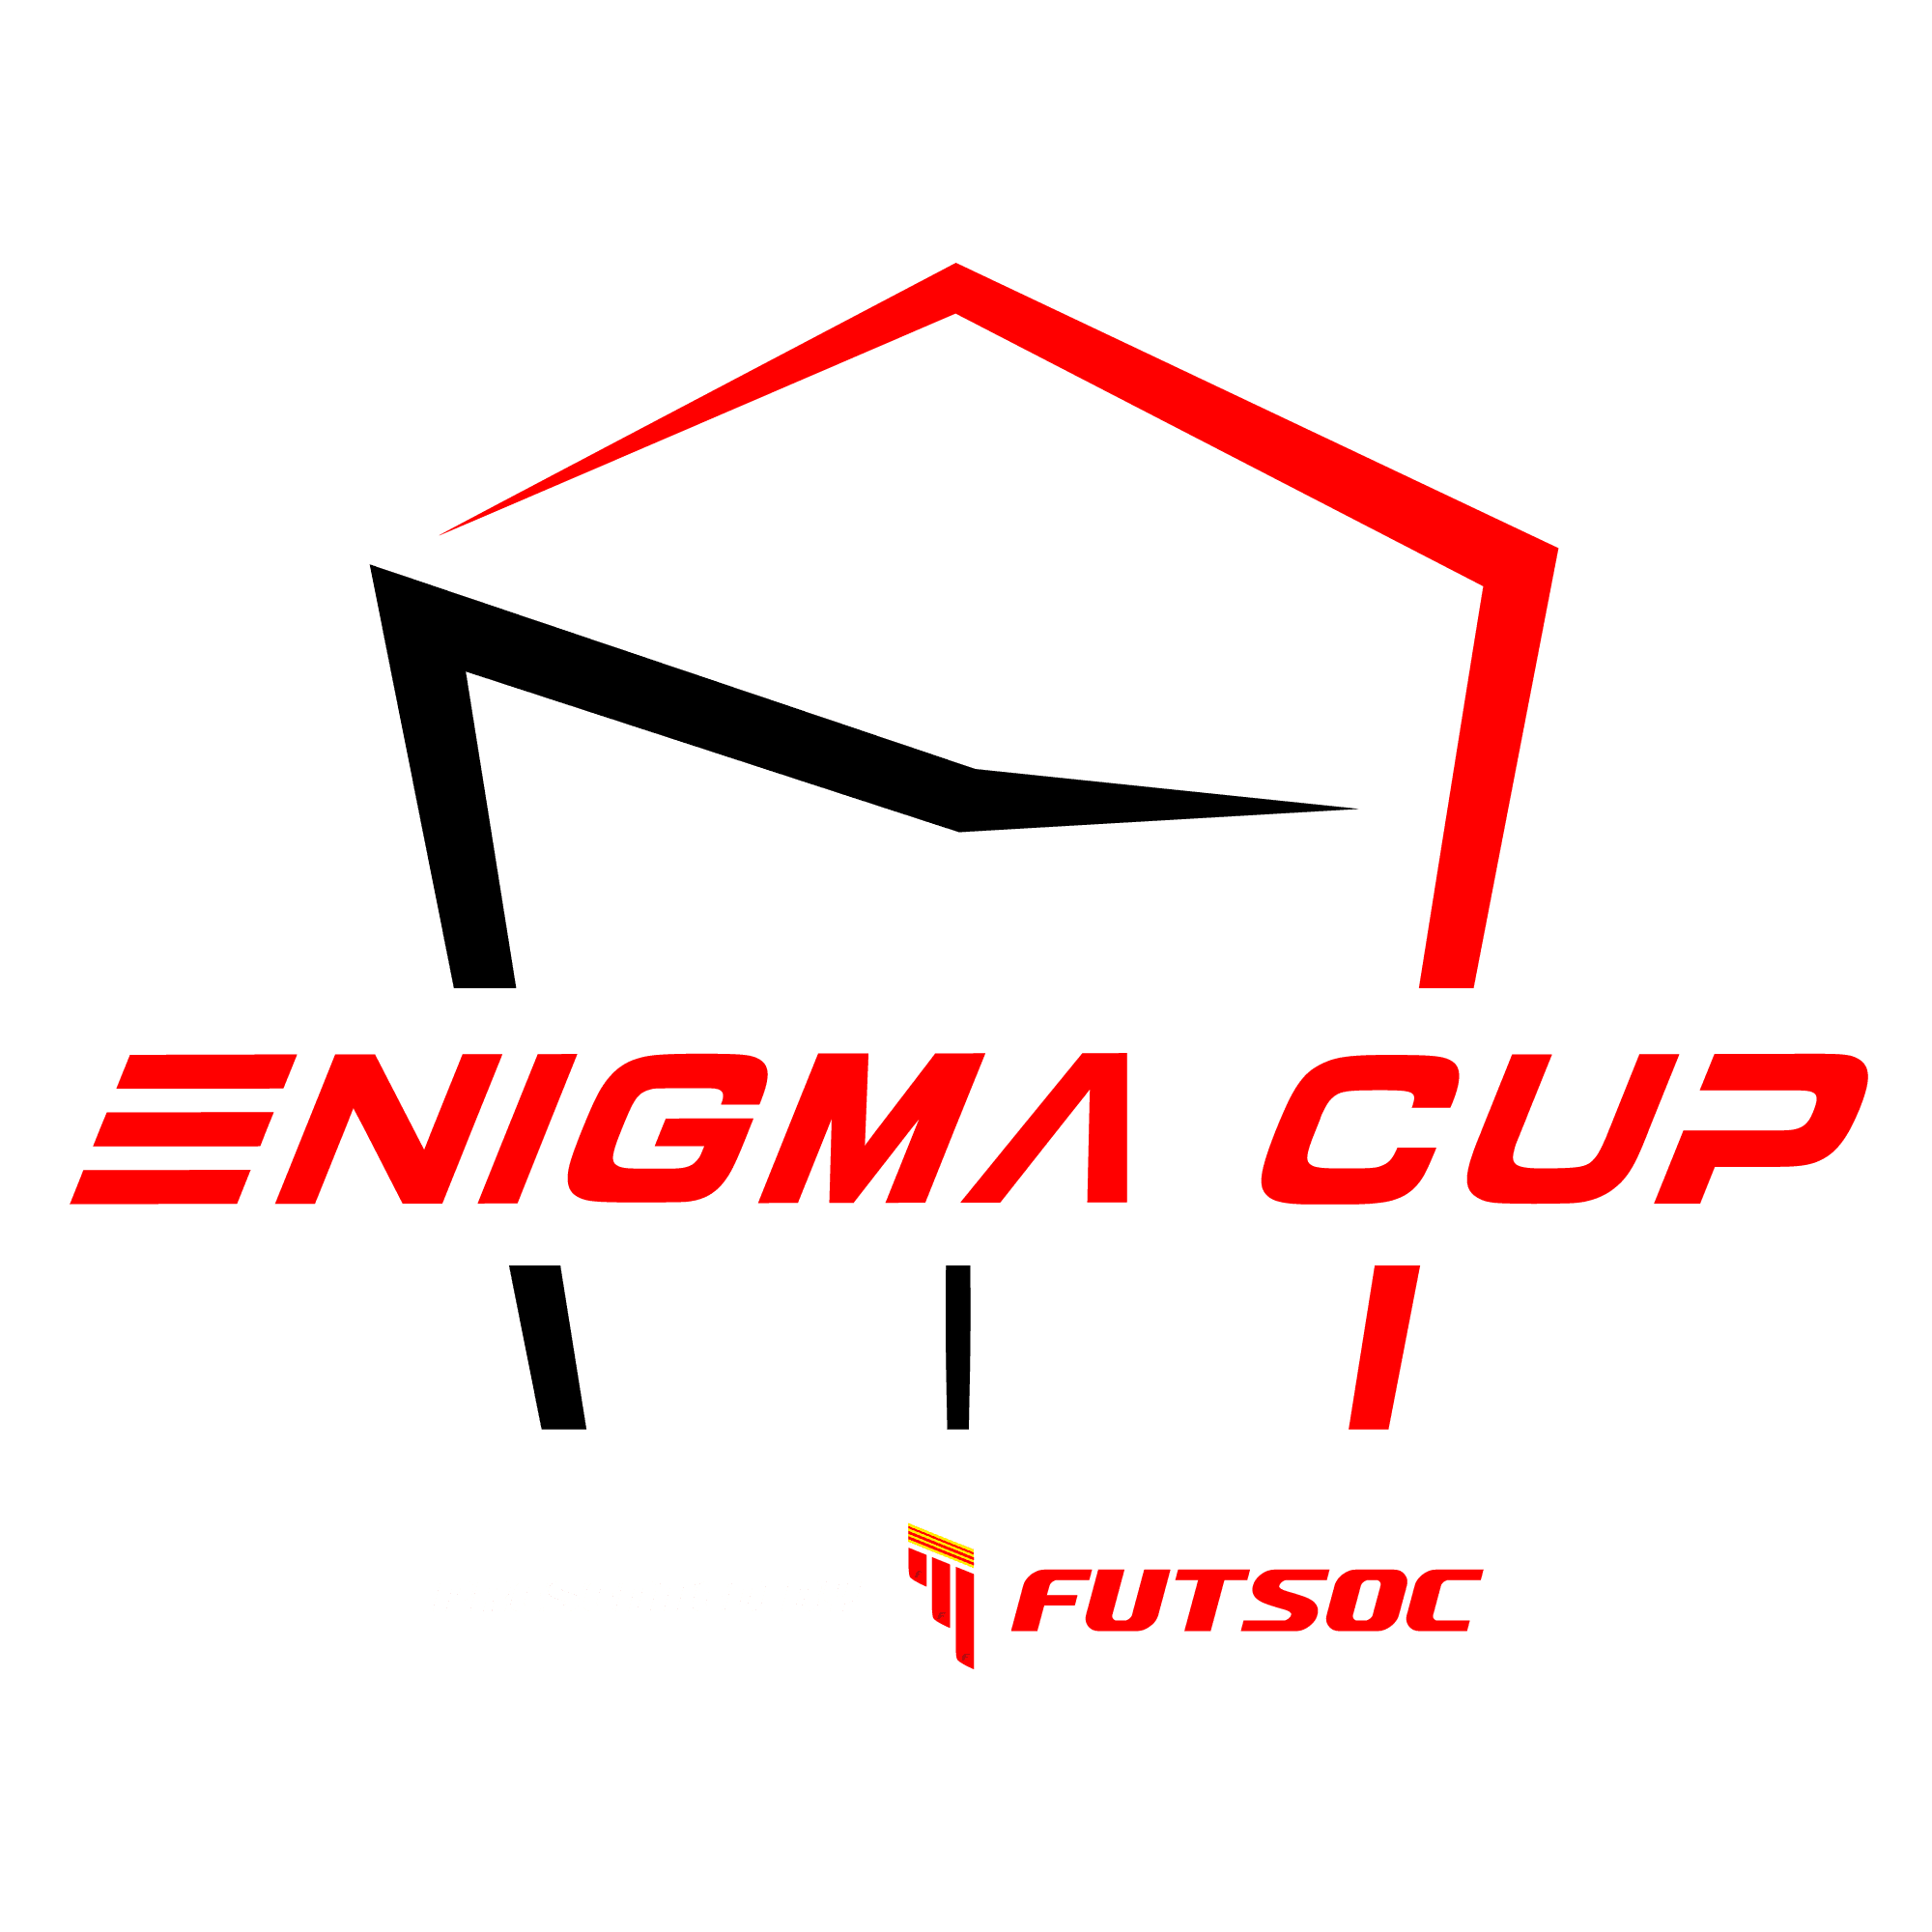 ENIGMA Cup